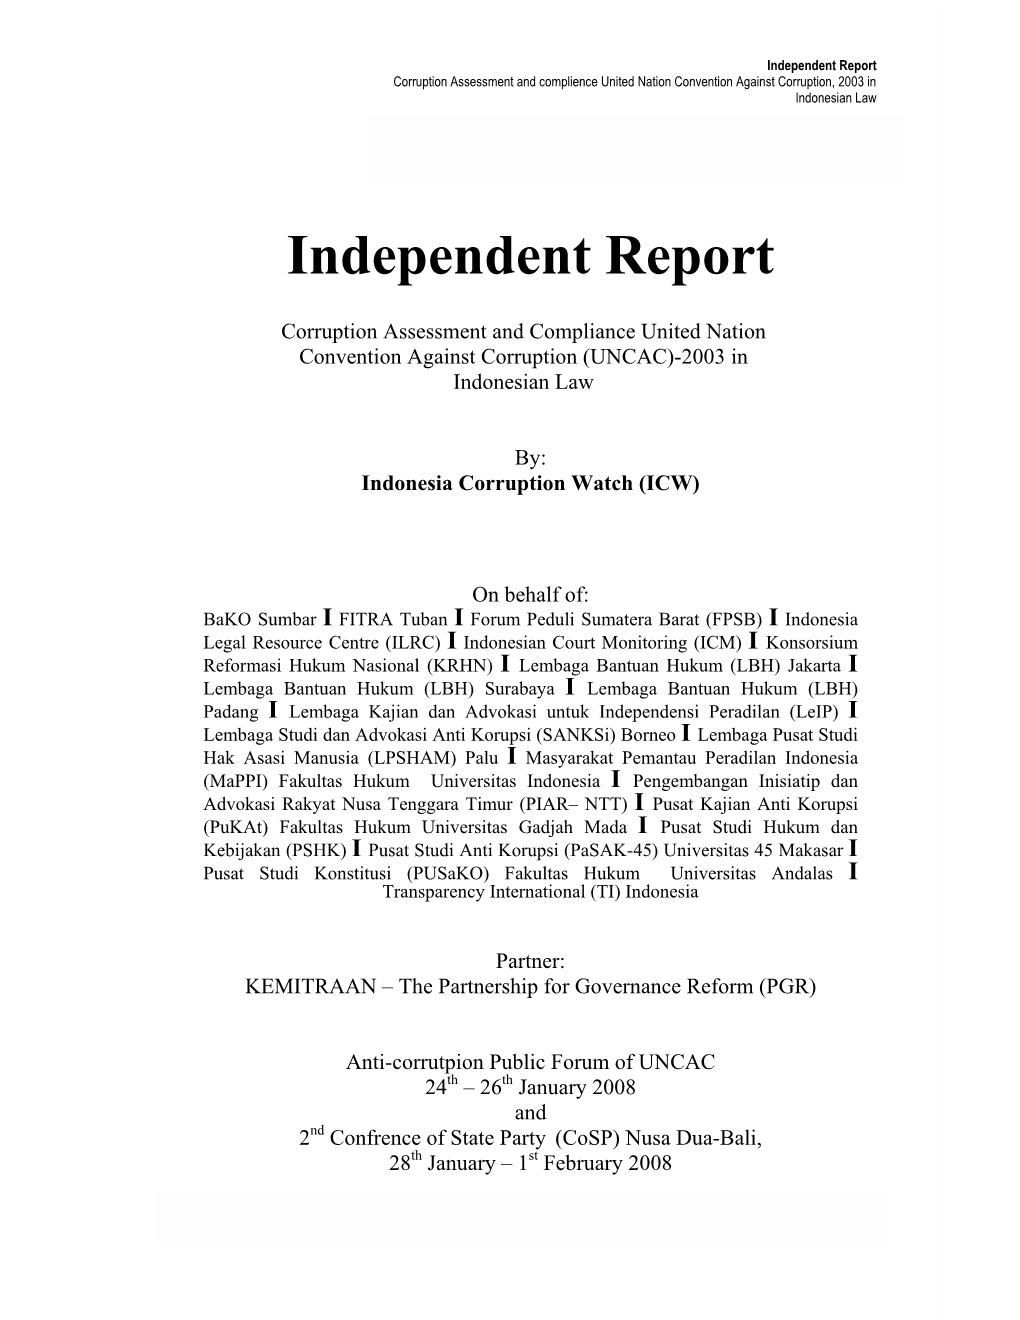 Independent Report Corruption Assessment and Complience United Nation Convention Against Corruption, 2003 in Indonesian Law